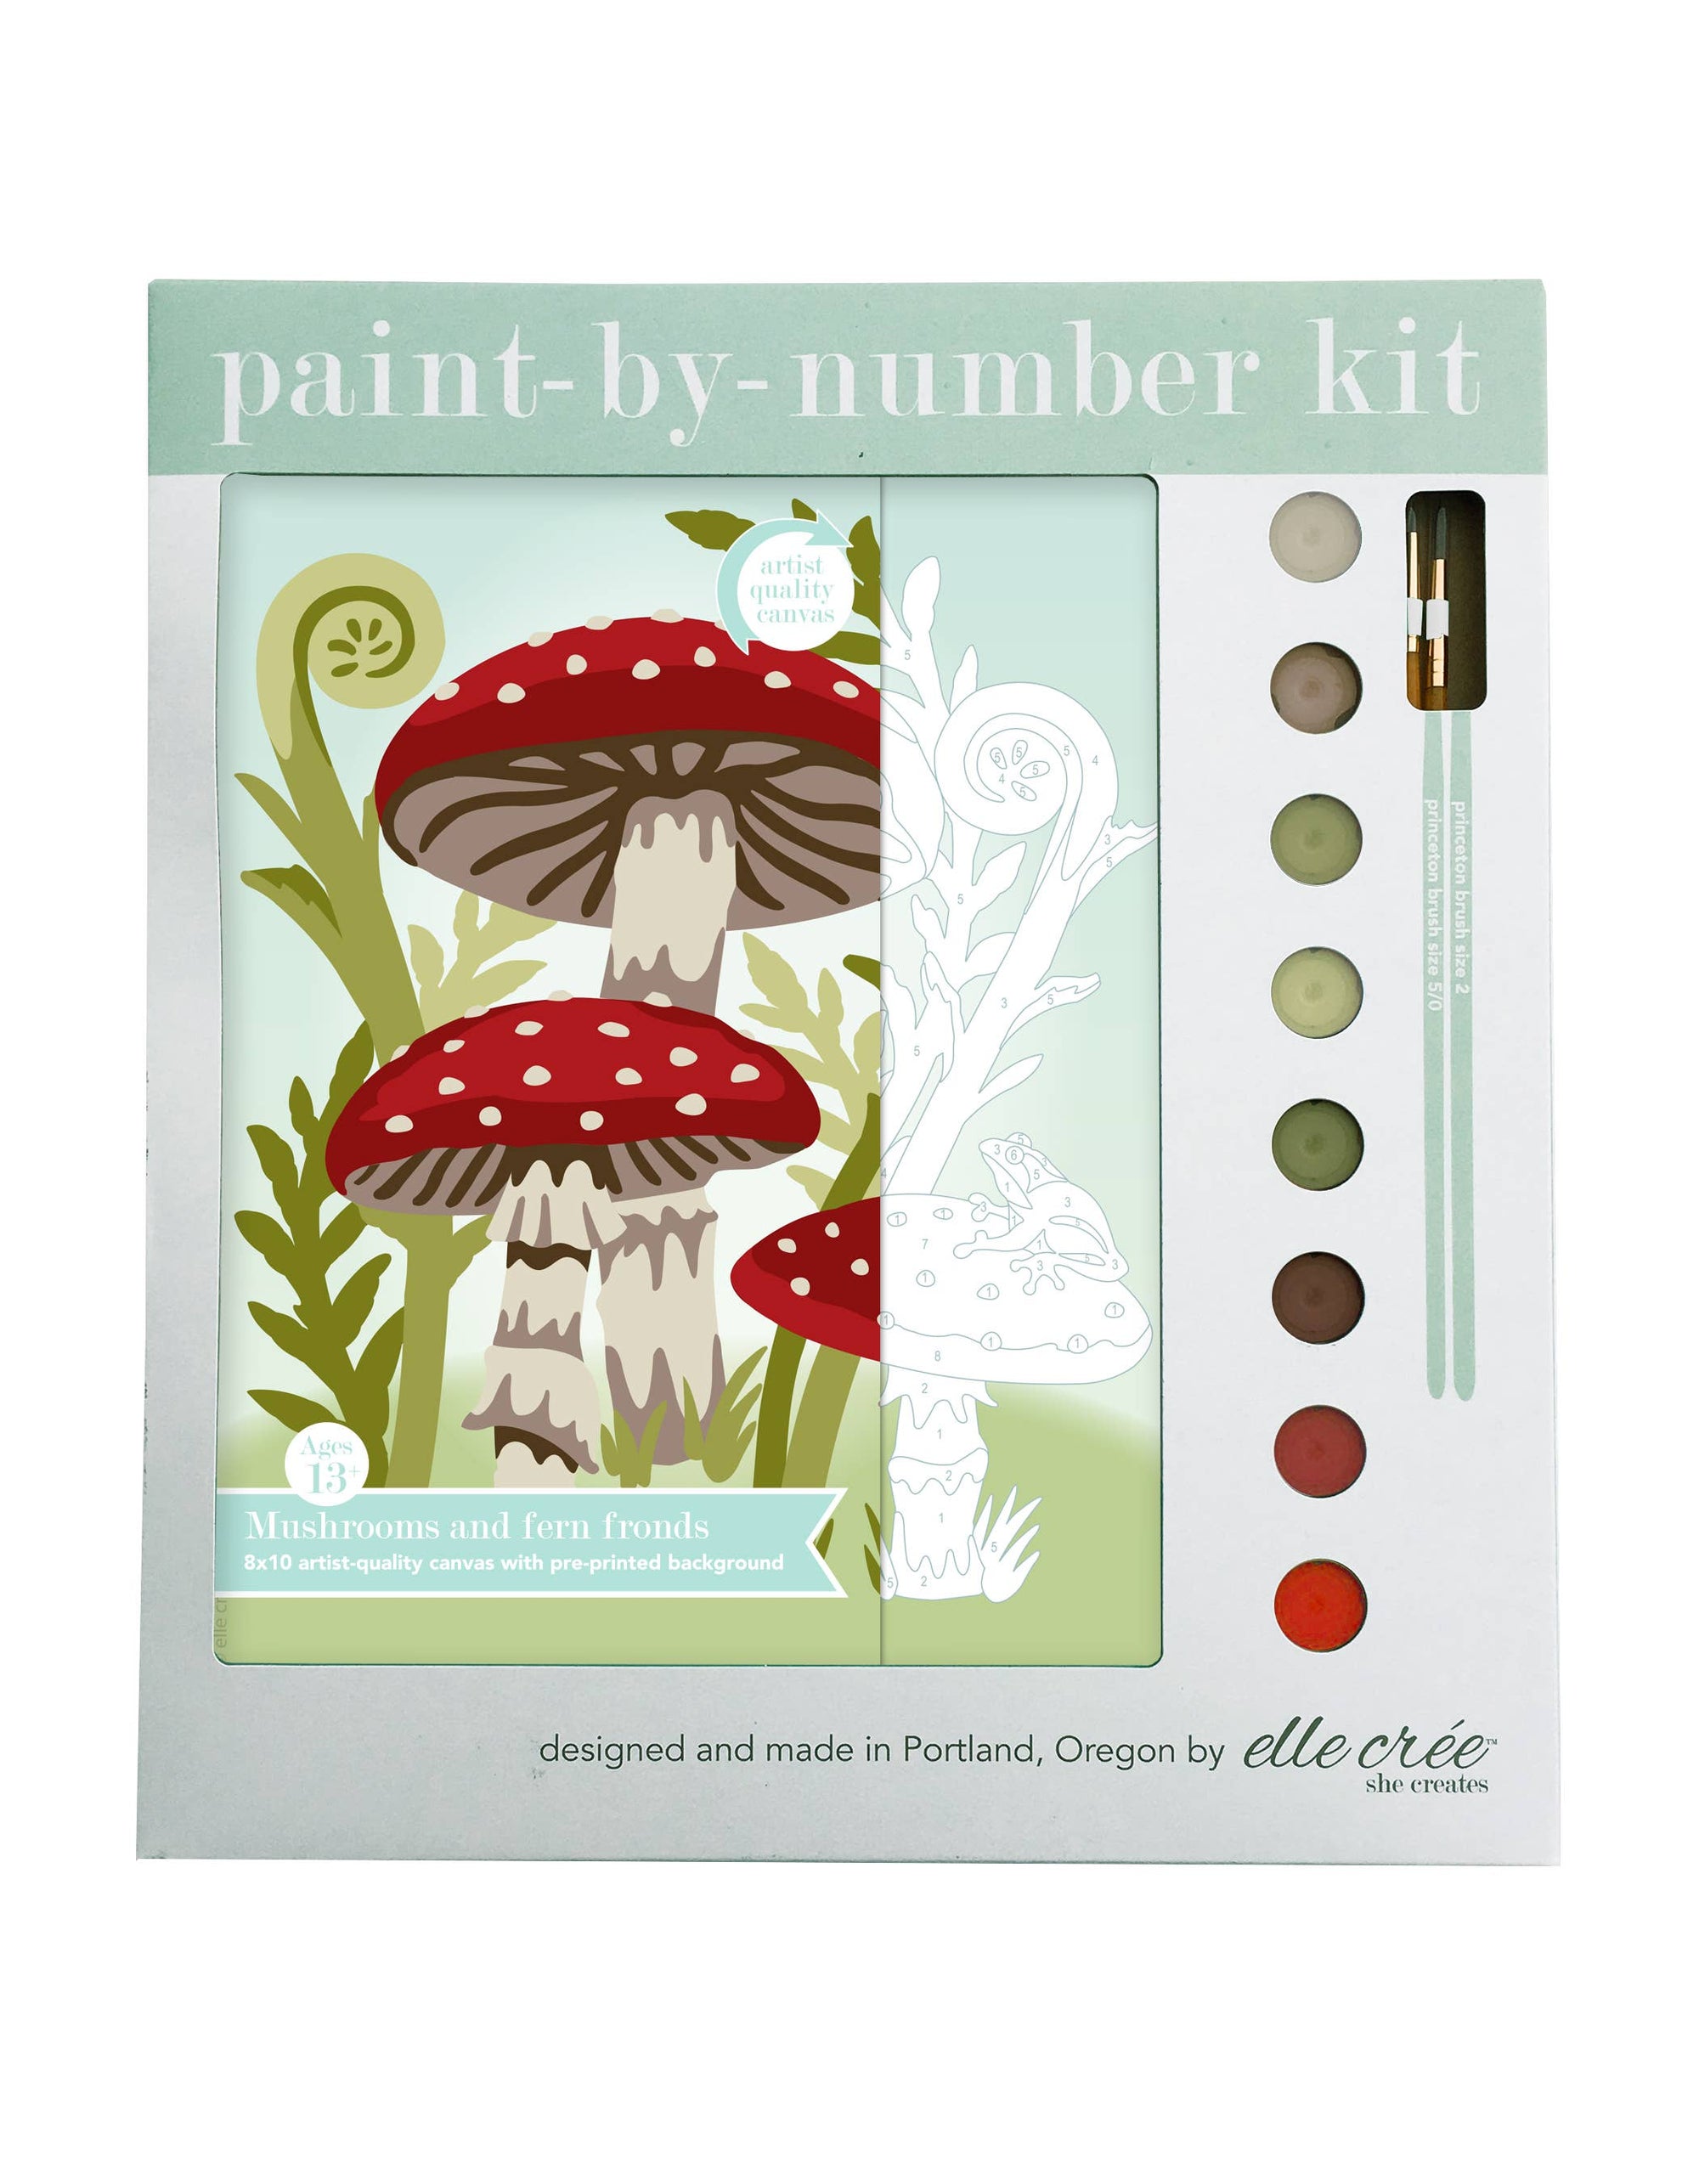 Paint By Number Kits